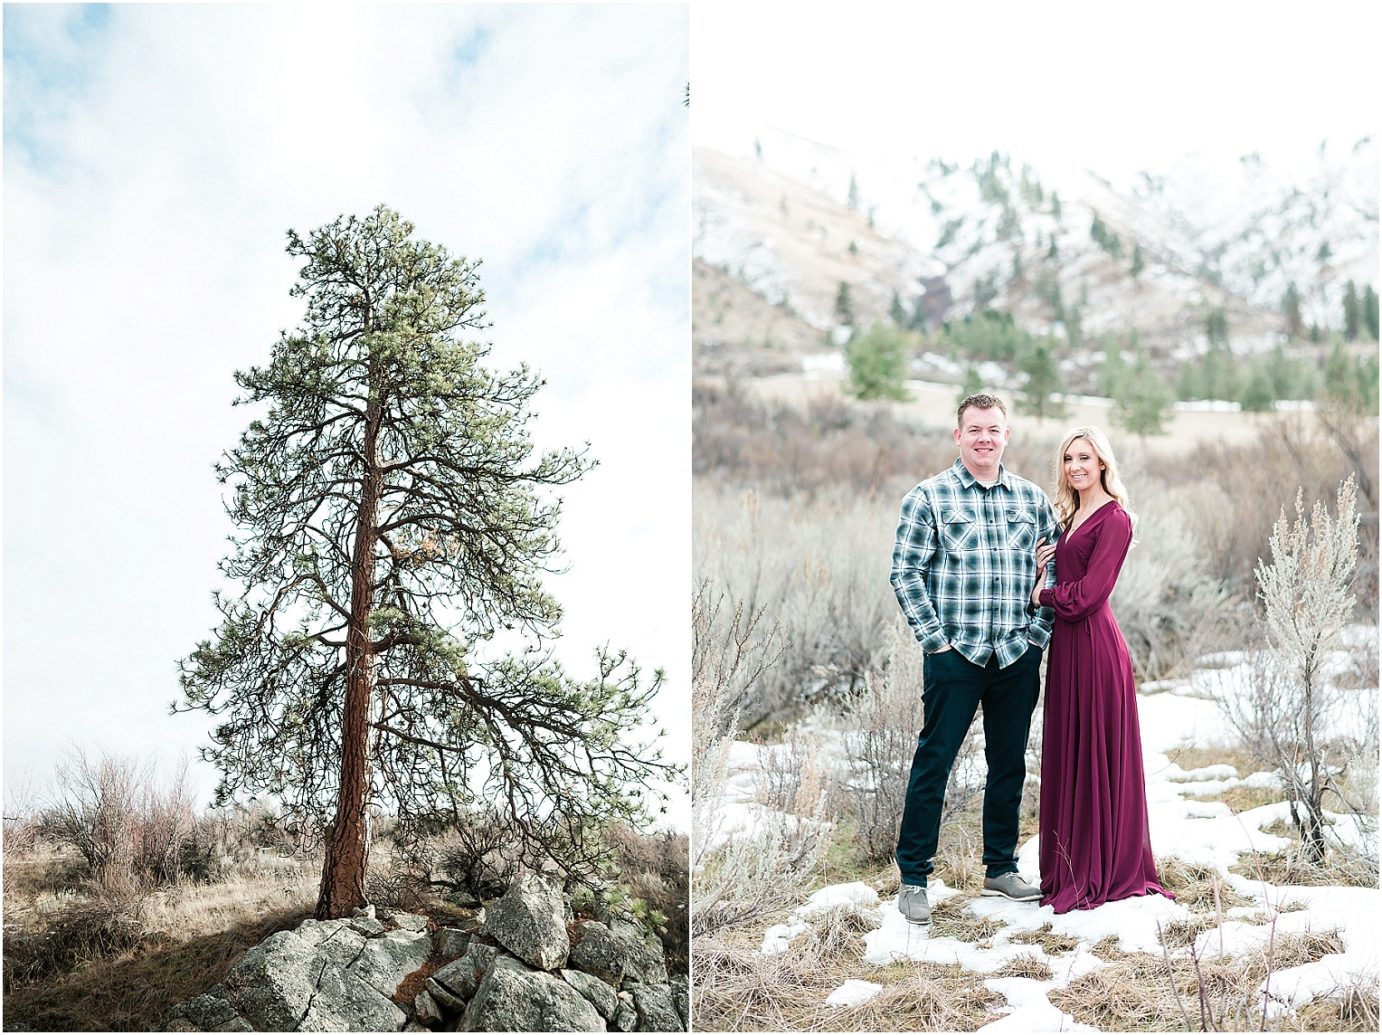 Lake Chelan Engagement Session bride to be in maroon dress